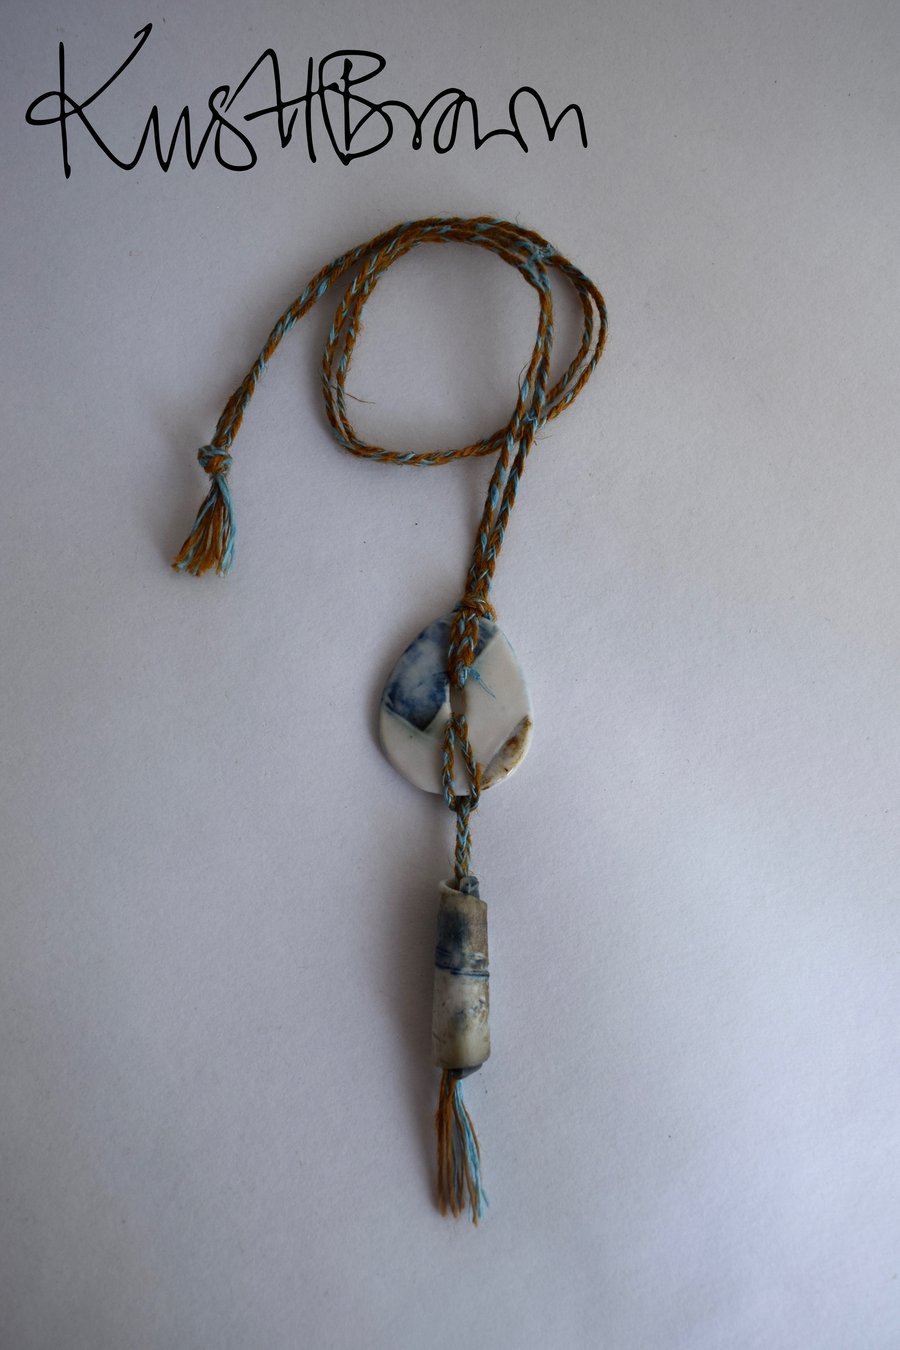 Porcelain Pebble Pendant with Bead and Linen Thread